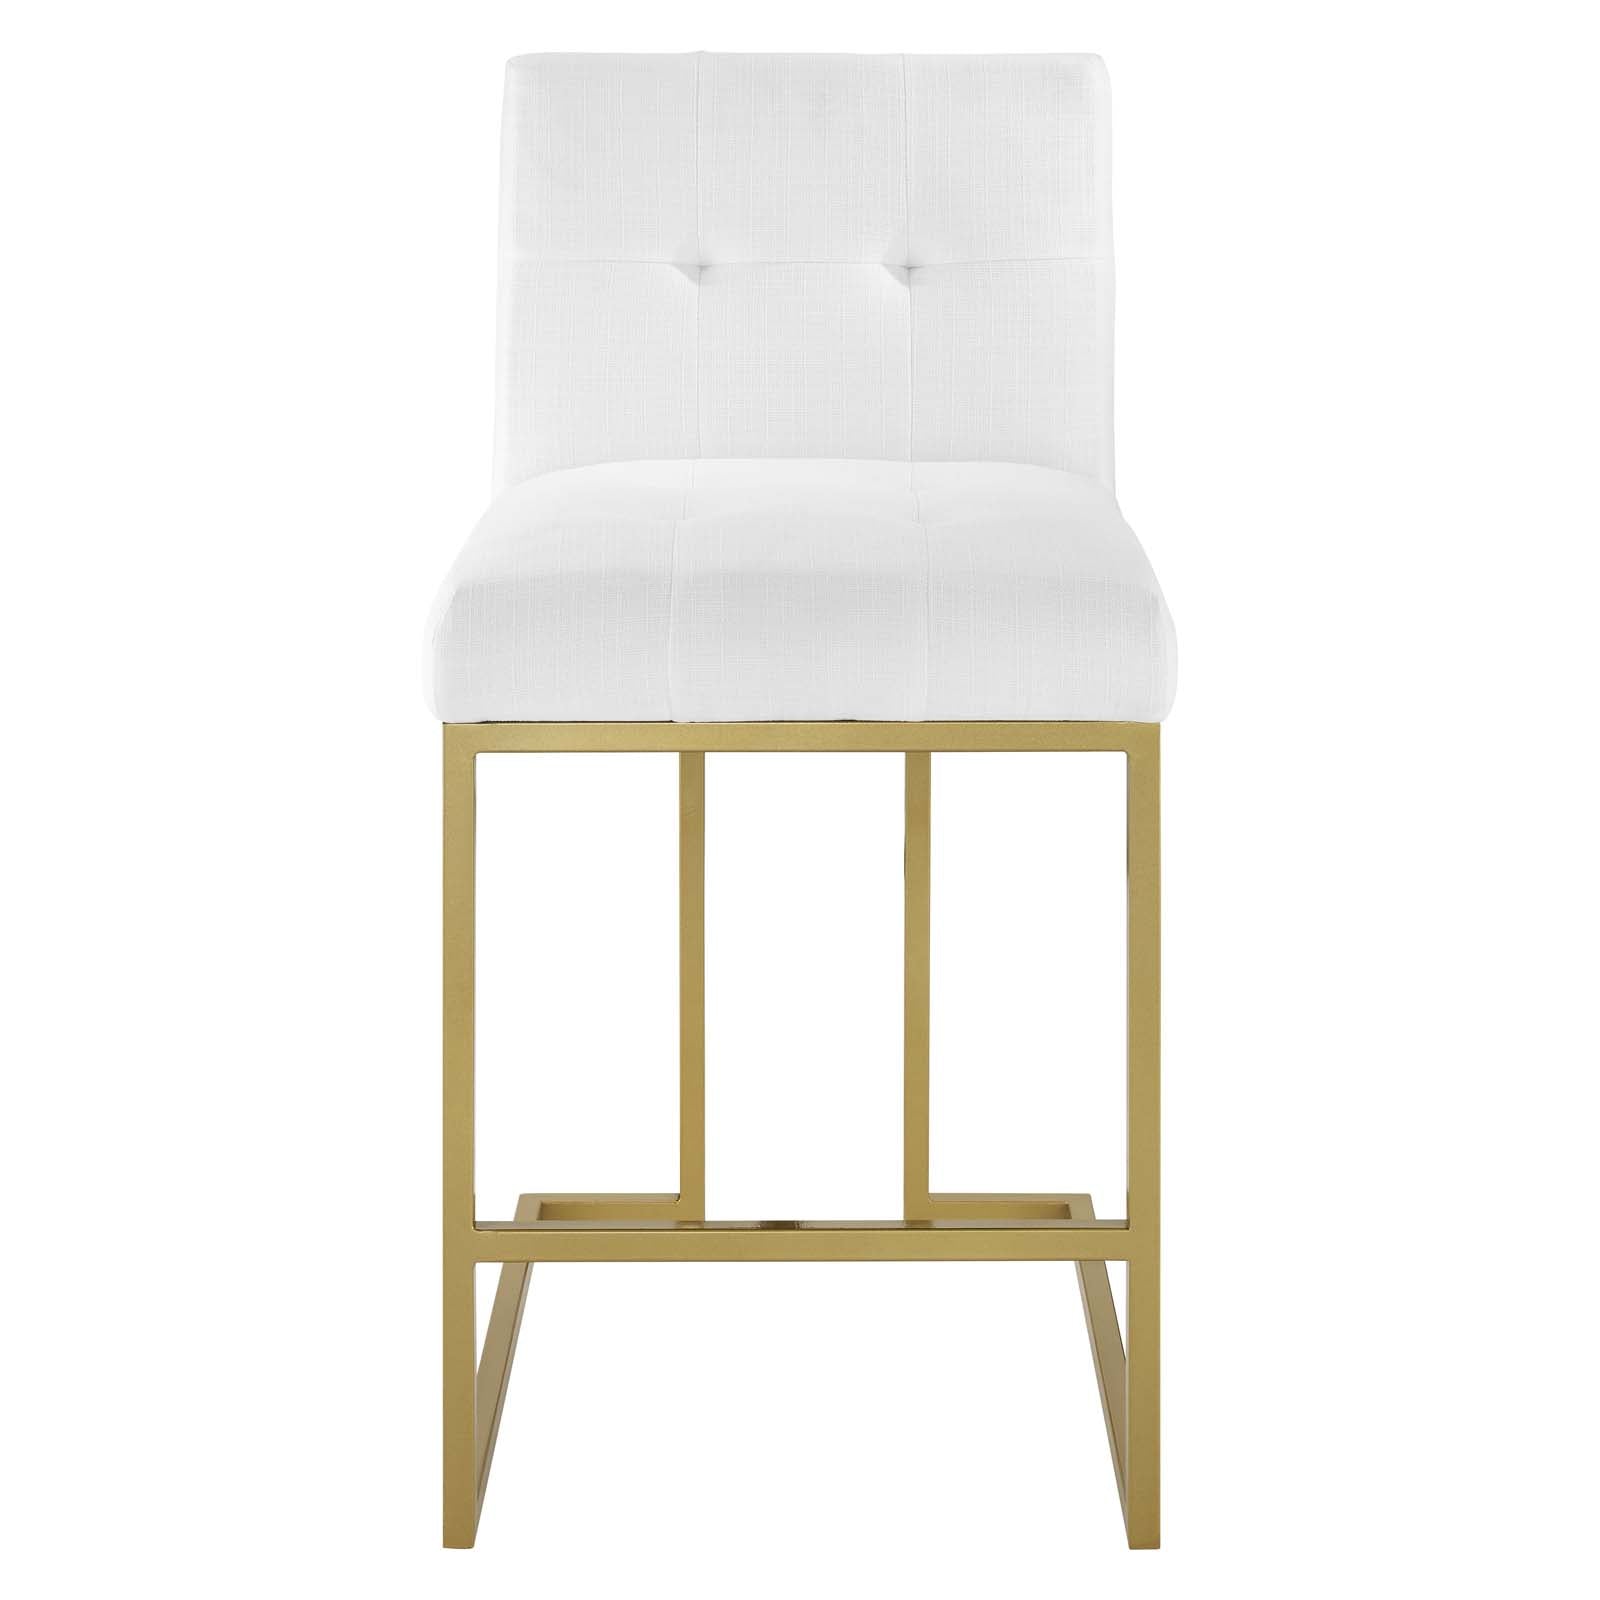 Modway Barstools - Privy Gold Stainless Steel Upholstered Fabric Counter Stool Gold White